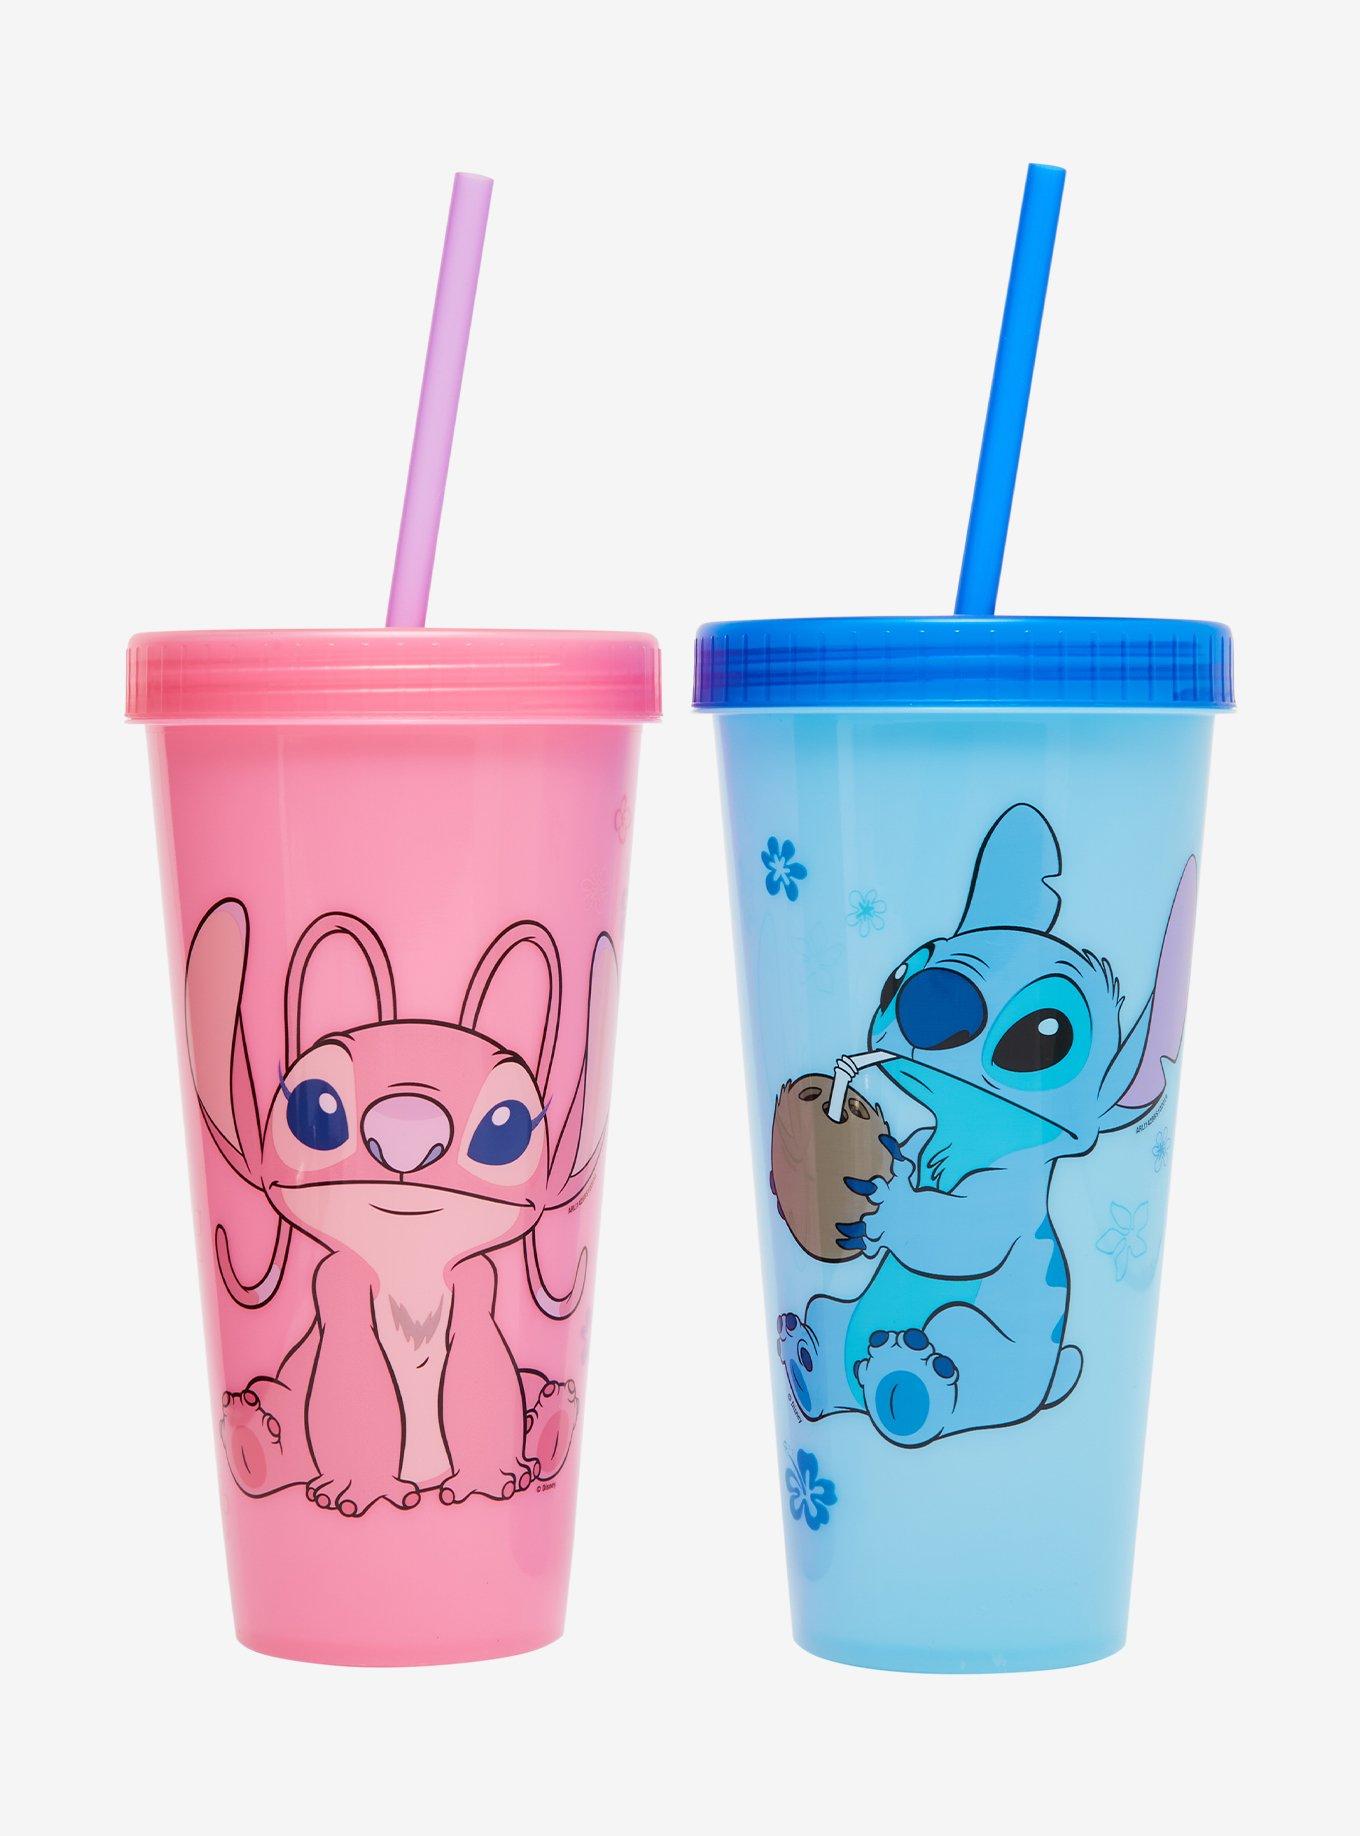 Disney 815279 Lilo & Stitch Color Changing Cup Pack of 4